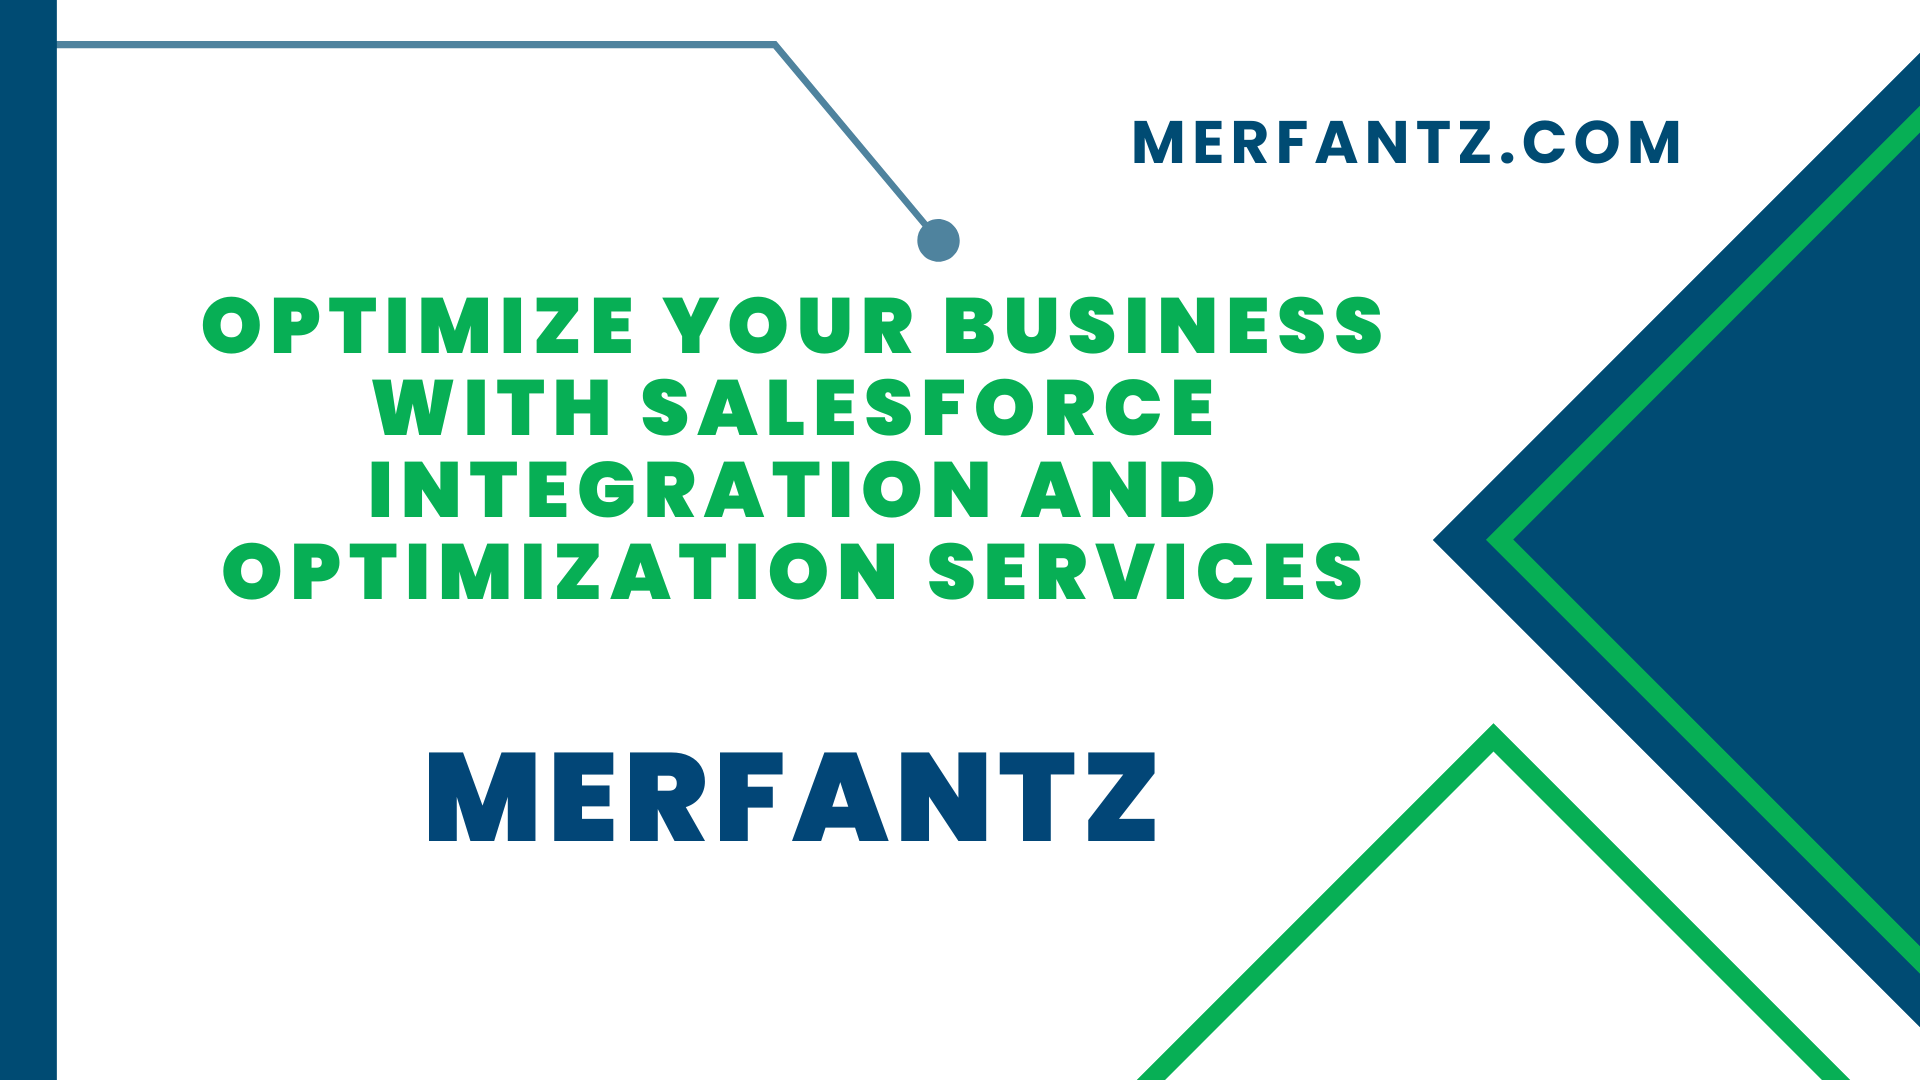 Optimize Your Business with Salesforce Integration and Optimization Services